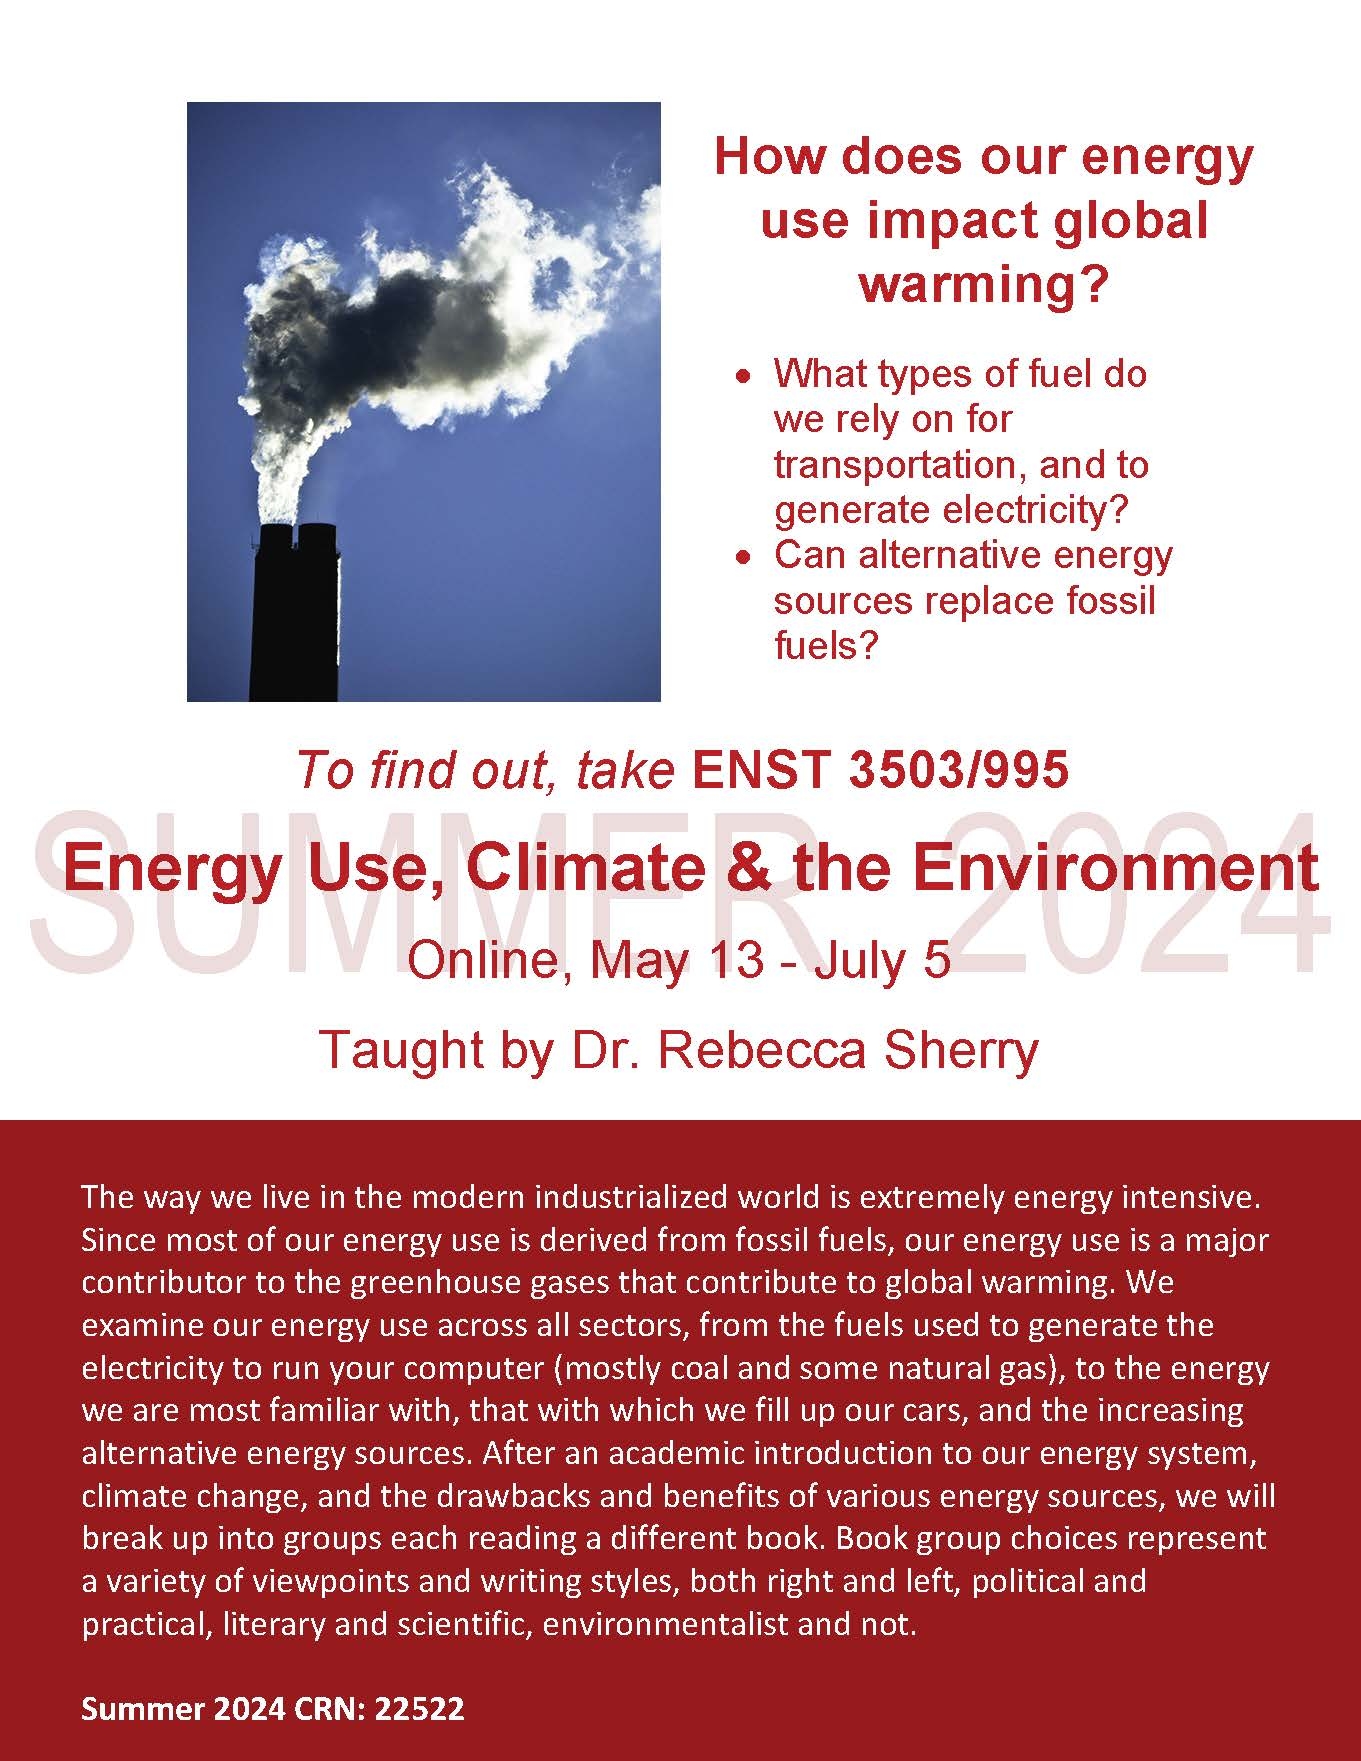 How does our energy use impact global warming? • What types of fuel do we rely on for transportation, and to generate electricity? • Can alternative energy sources replace fossil fuels? To find out, take ENST 3503/995 Energy Use, Climate & the Environment Online, May 13 - July 5 Taught by Dr. Rebecca Sherry The way we live in the modern industrialized world is extremely energy intensive. Since most of our energy use is derived from fossil fuels, our energy use is a major contributor to the greenhouse gases that contribute to global warming. We examine our energy use across all sectors, from the fuels used to generate the electricity to run your computer (mostly coal and some natural gas), to the energy we are most familiar with, that with which we fill up our cars, and the increasing alternative energy sources. After an academic introduction to our energy system, climate change, and the drawbacks and benefits of various energy sources, we will break up into groups each reading a different book. Book group choices represent a variety of viewpoints and writing styles, both right and left, political and practical, literary and scientific, environmentalist and not. Summer 2024 CRN: 22522 SUMMER 2024